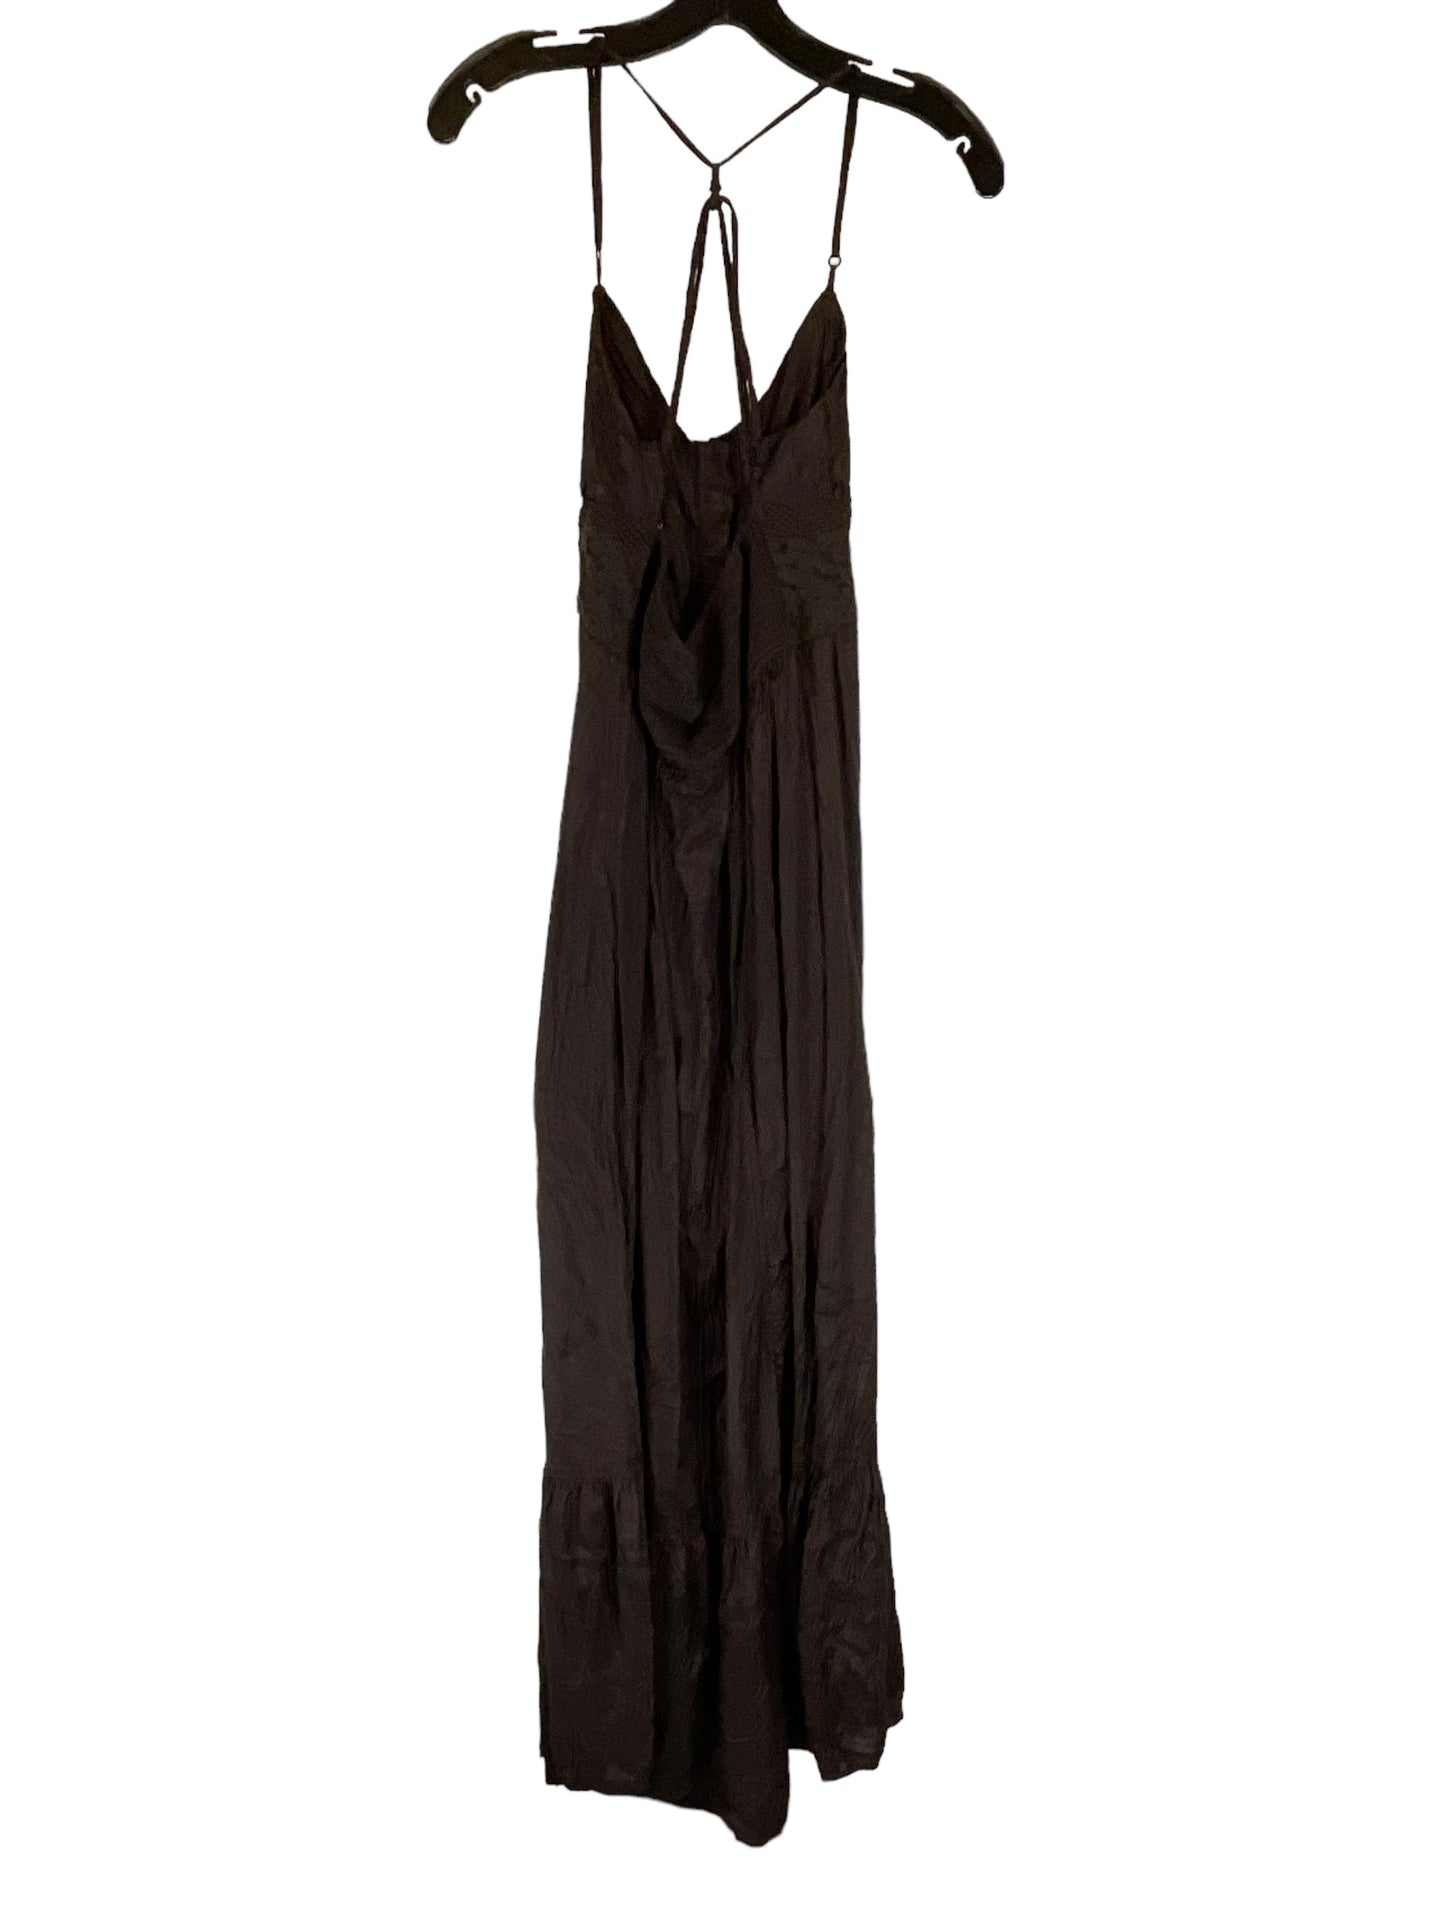 Dress Party Long By Urban Outfitters  Size: L